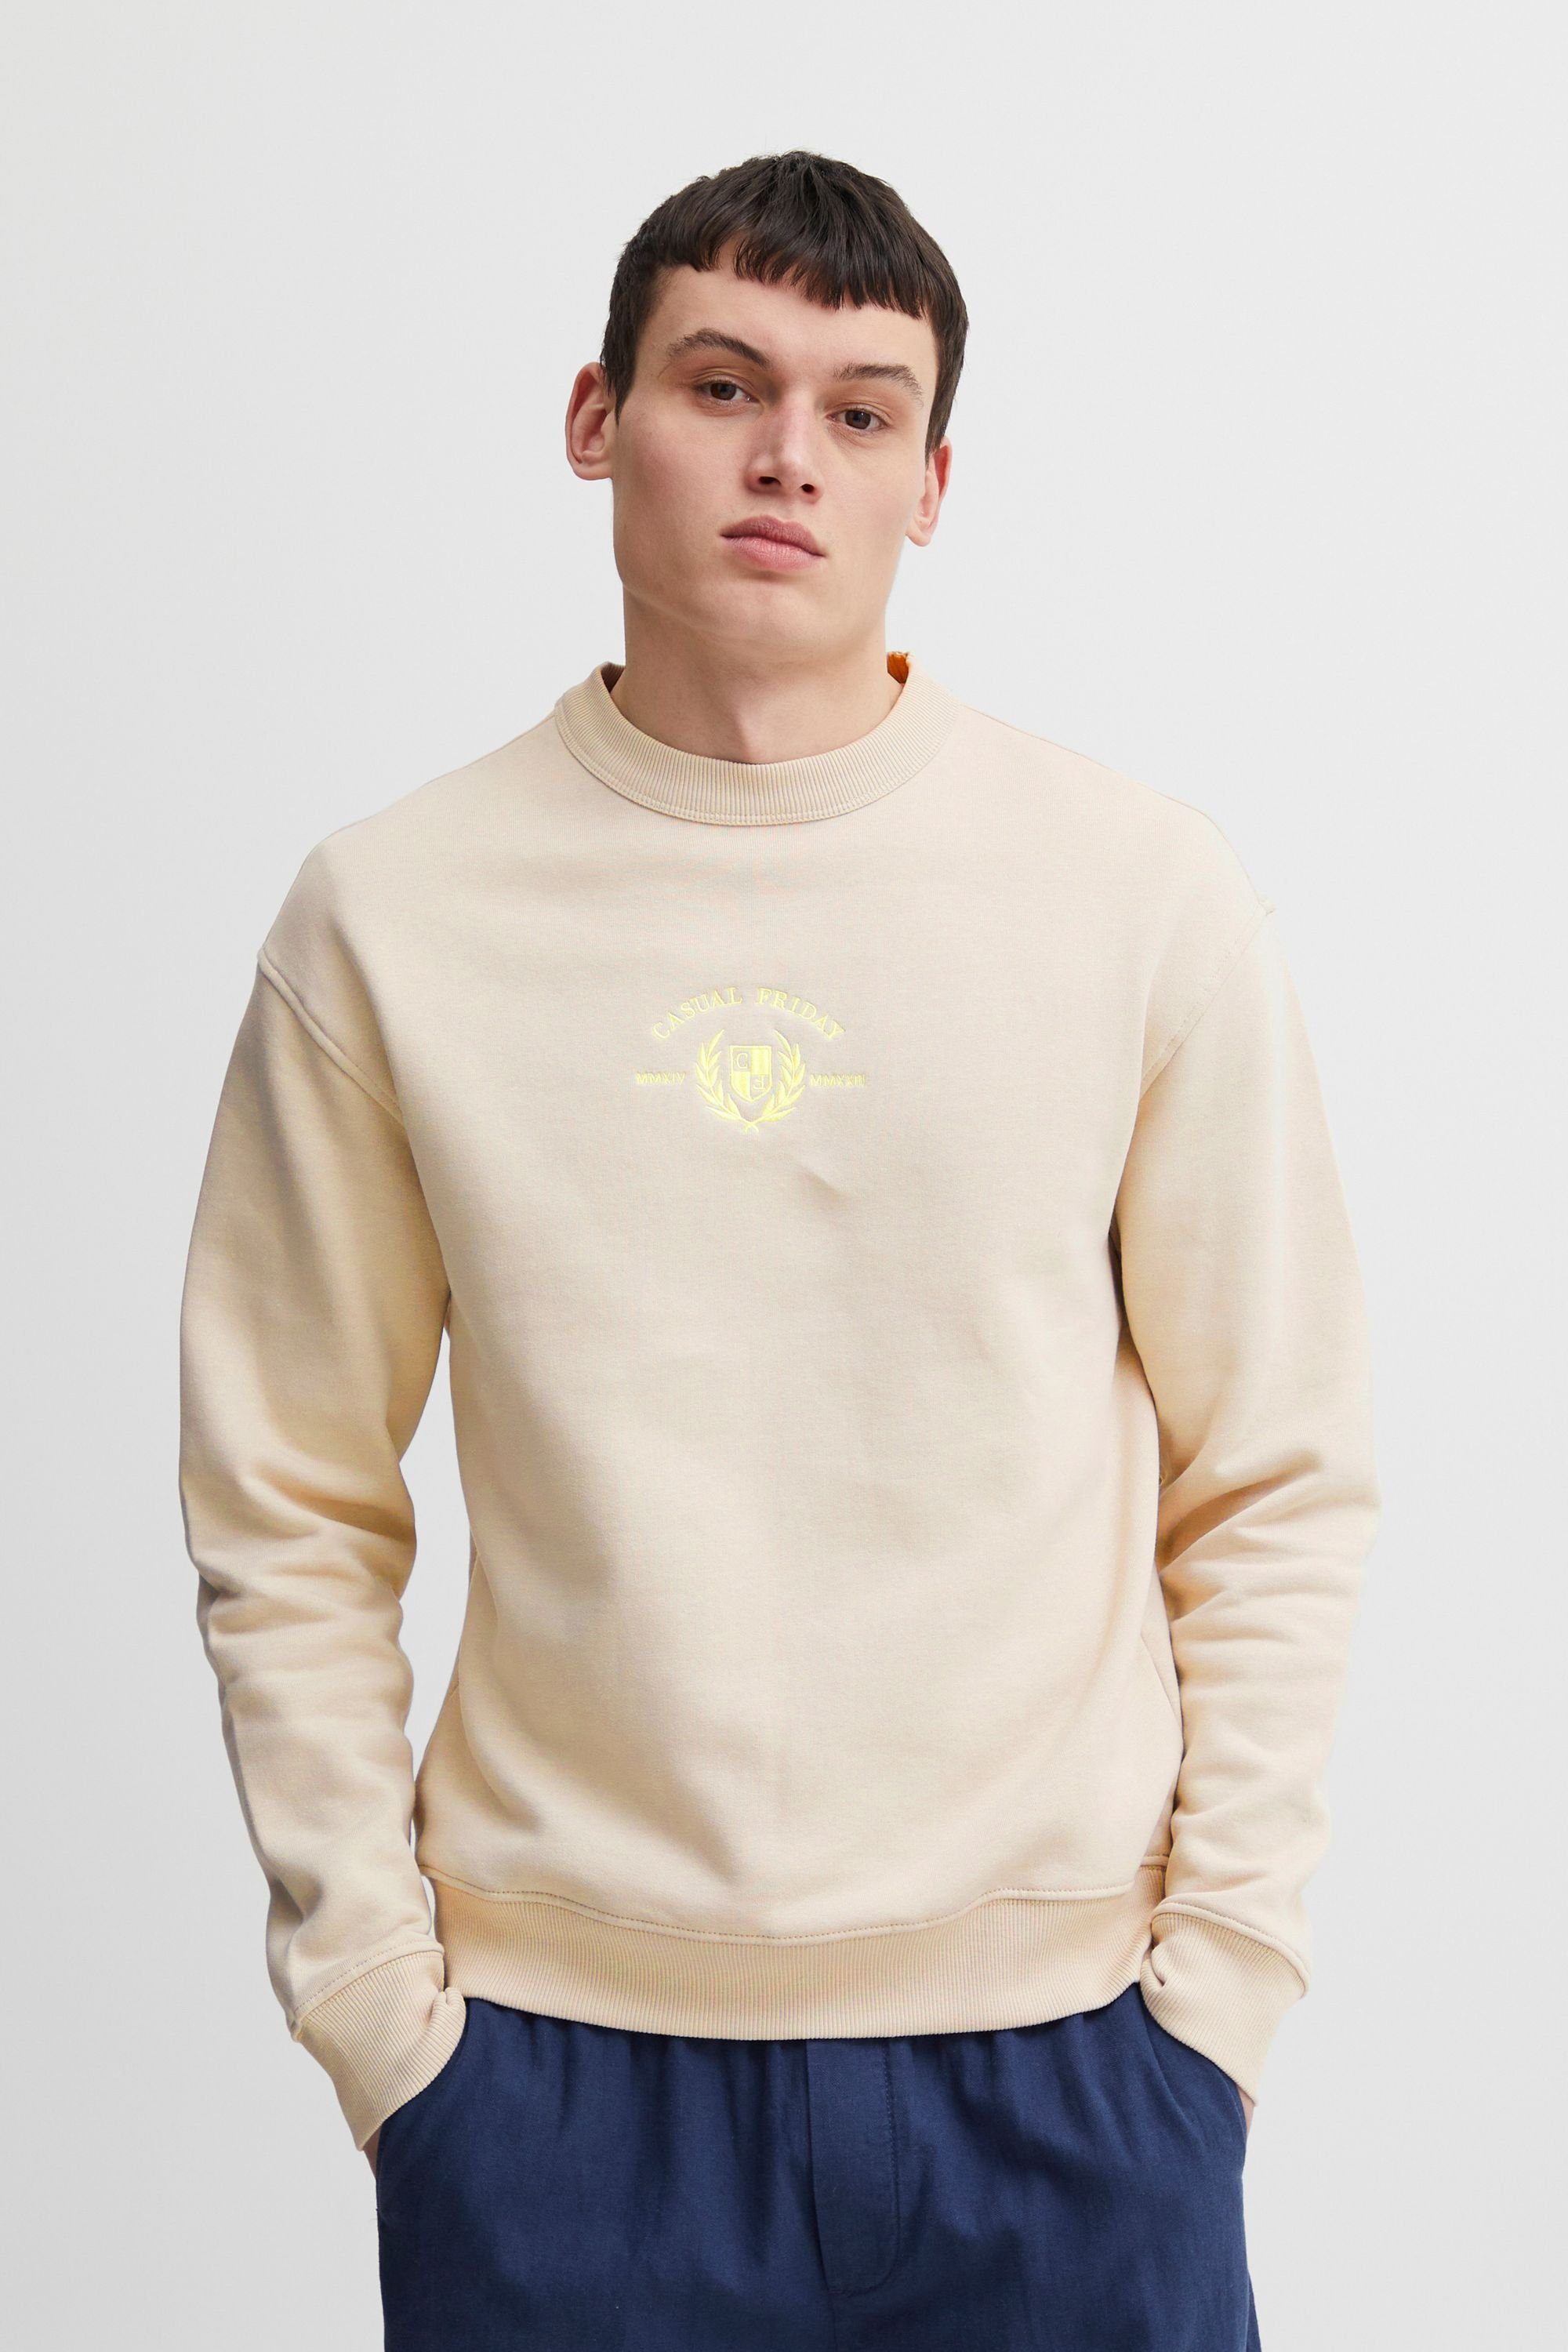 Gray embroidery relaxed CFSage sweat Sweatshirt Chateau 20504729 - w. Casual (154503) Friday